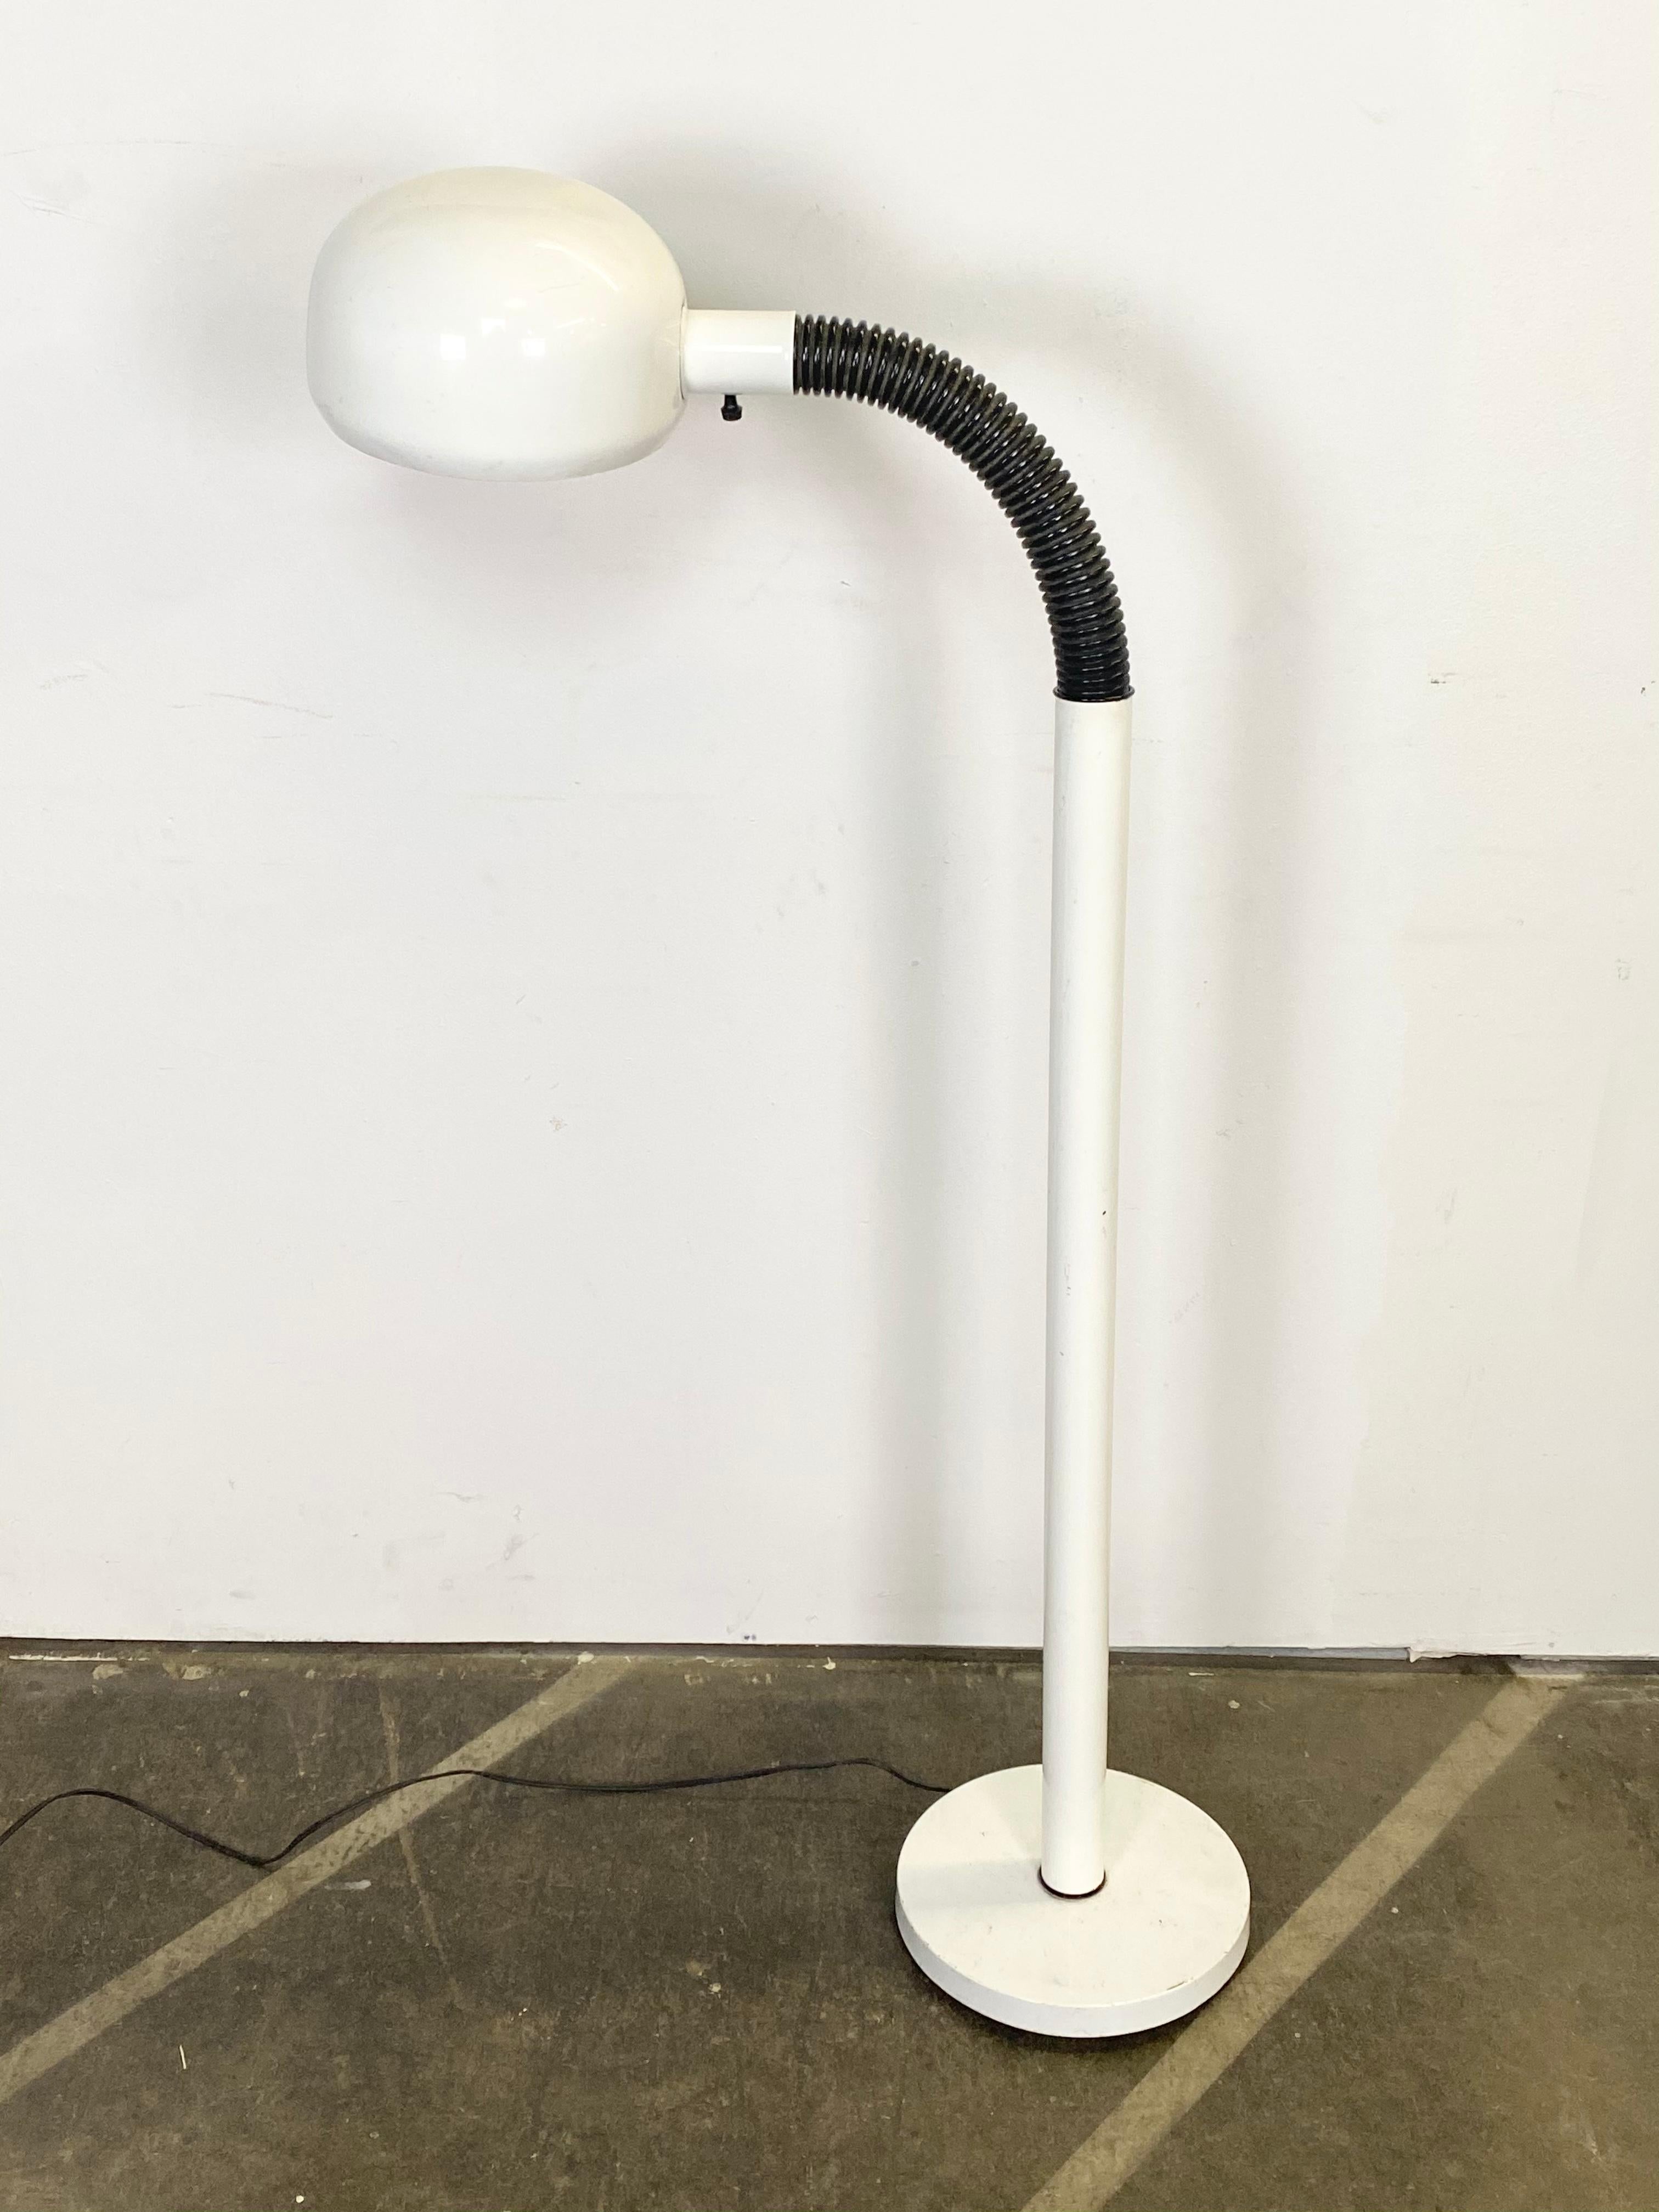 Cool modern gooseneck floor lamp. 1980s style with metal shade and base. Works and accommodates modern bulbs.